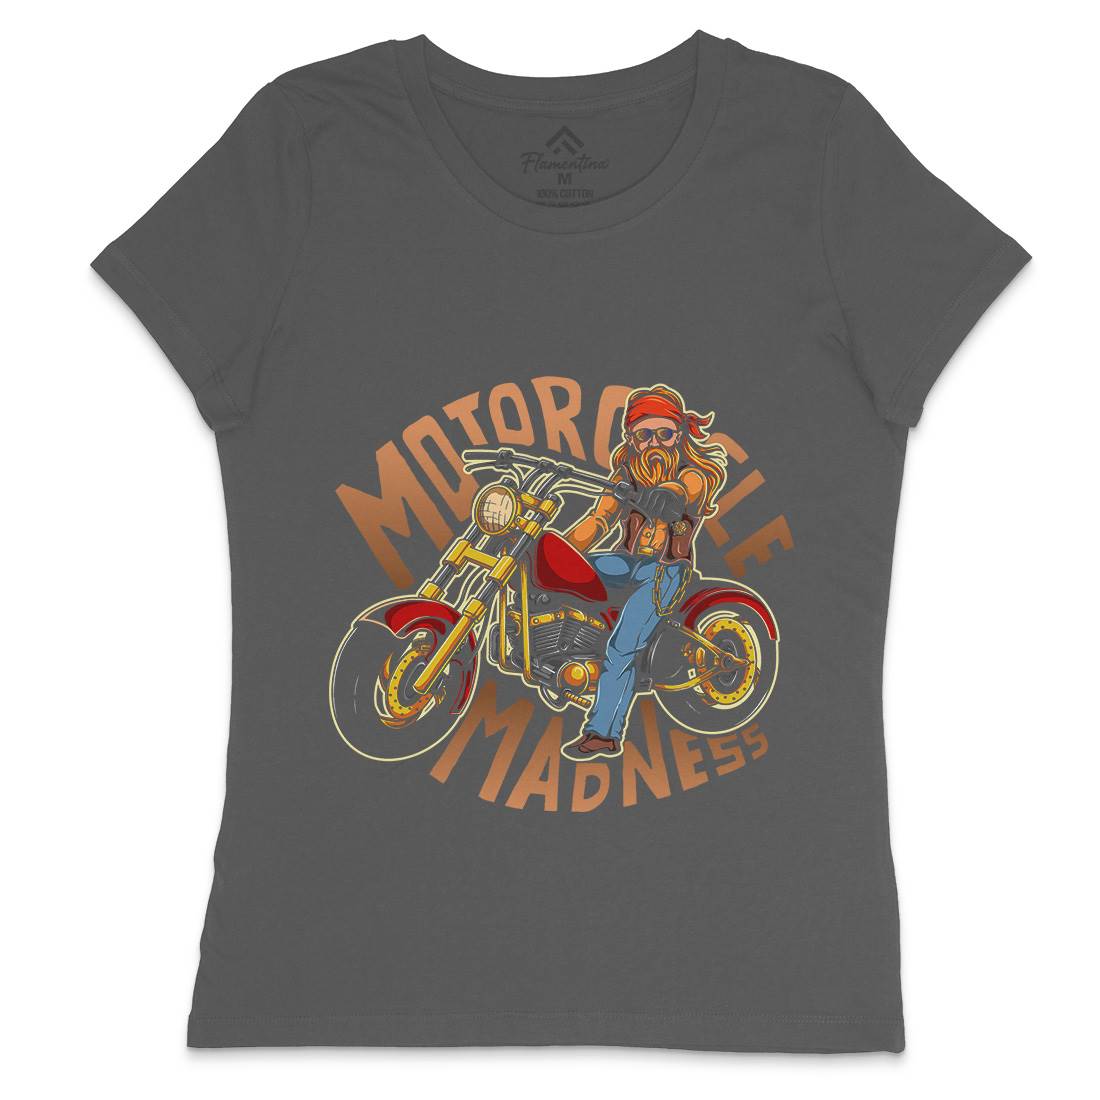 Madness Womens Crew Neck T-Shirt Motorcycles A438